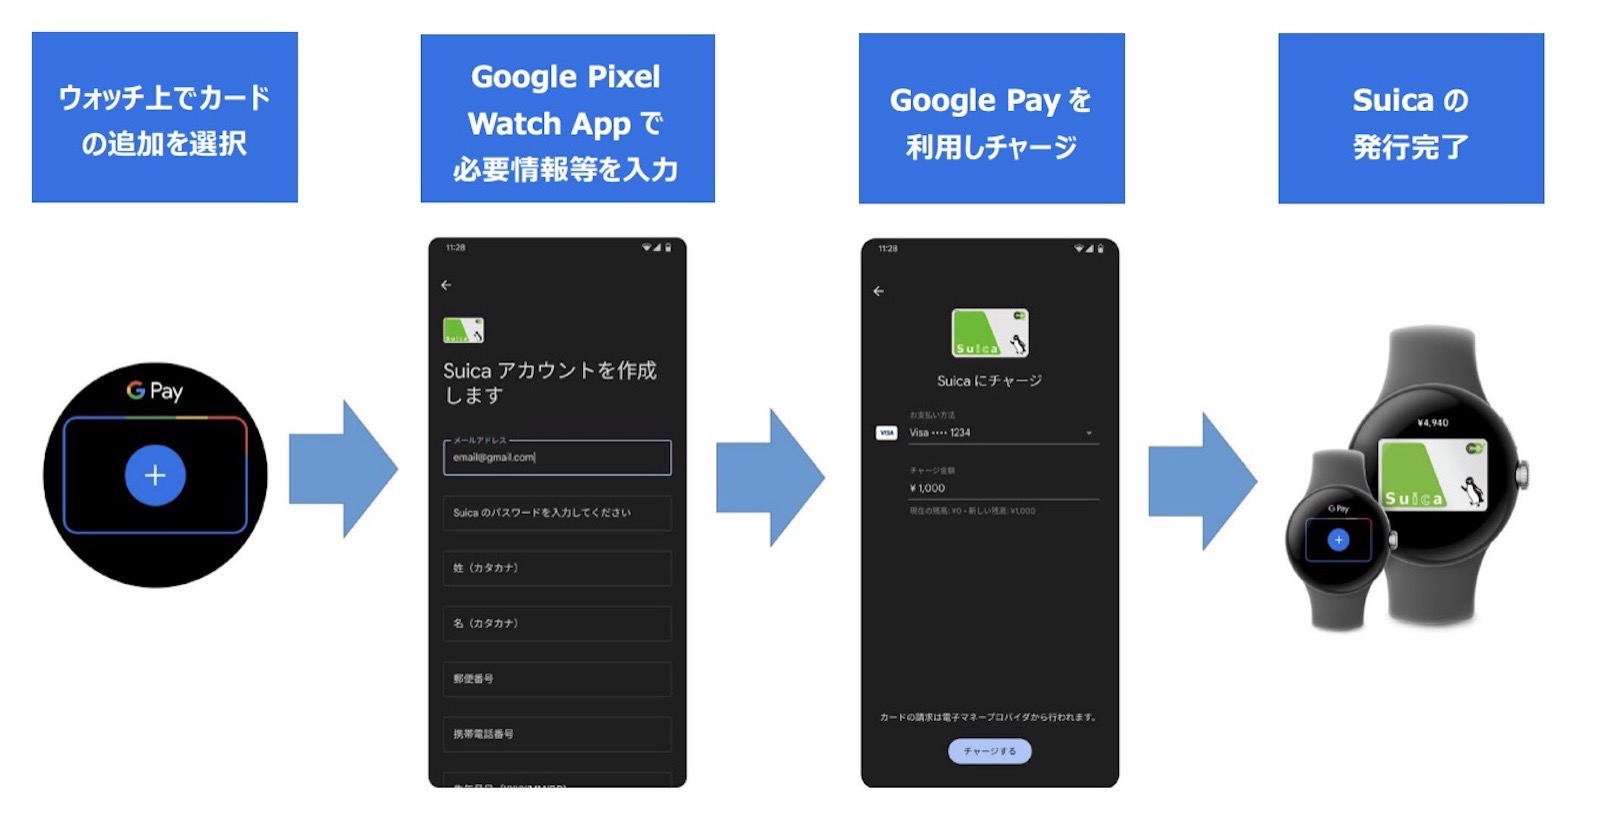 How to use suica on pixel watch